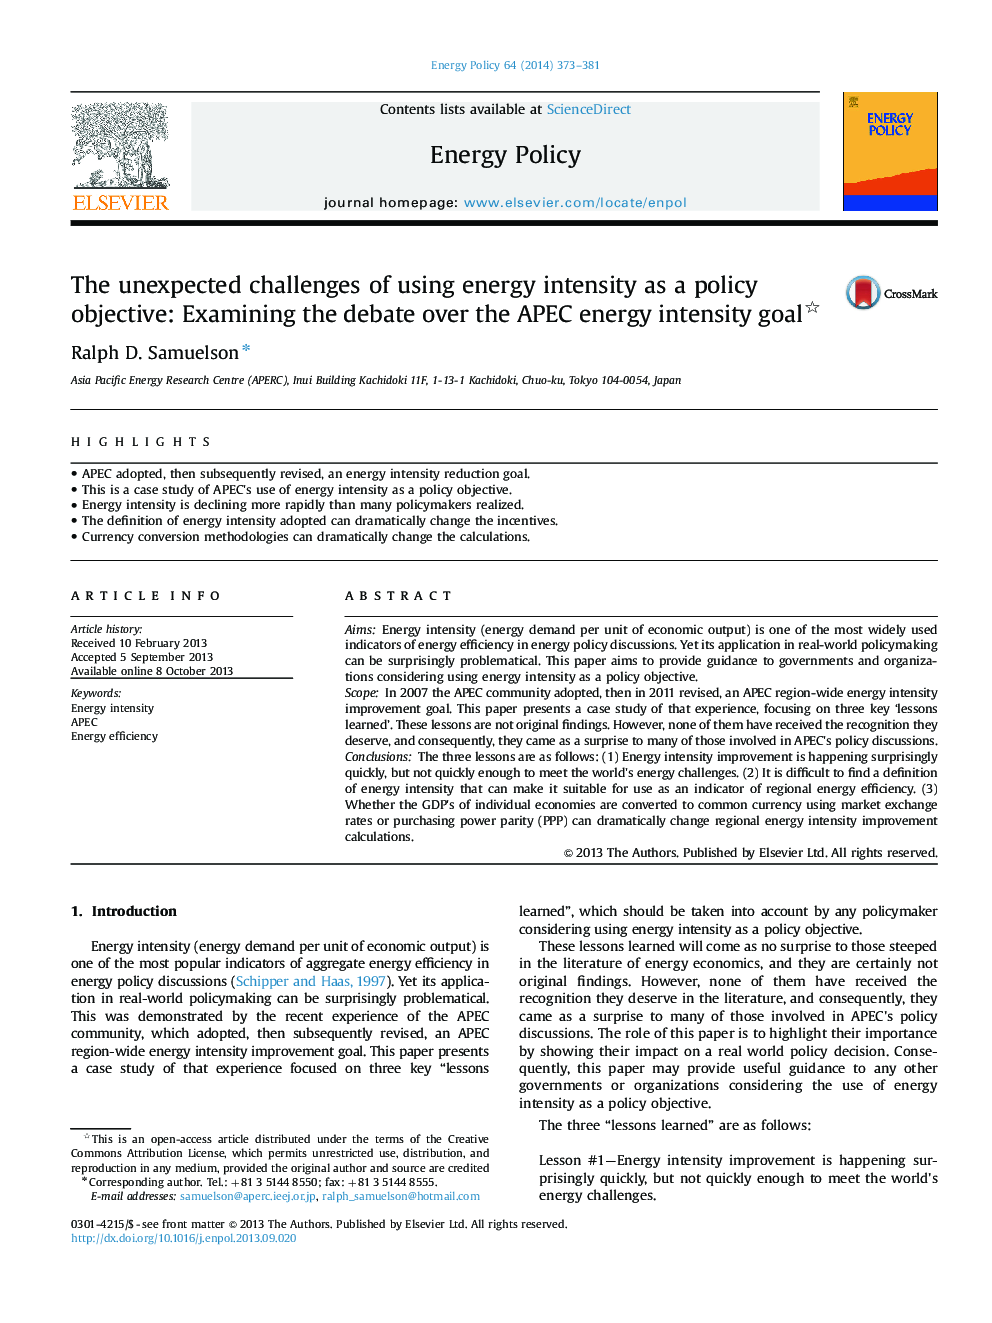 The unexpected challenges of using energy intensity as a policy objective: Examining the debate over the APEC energy intensity goal